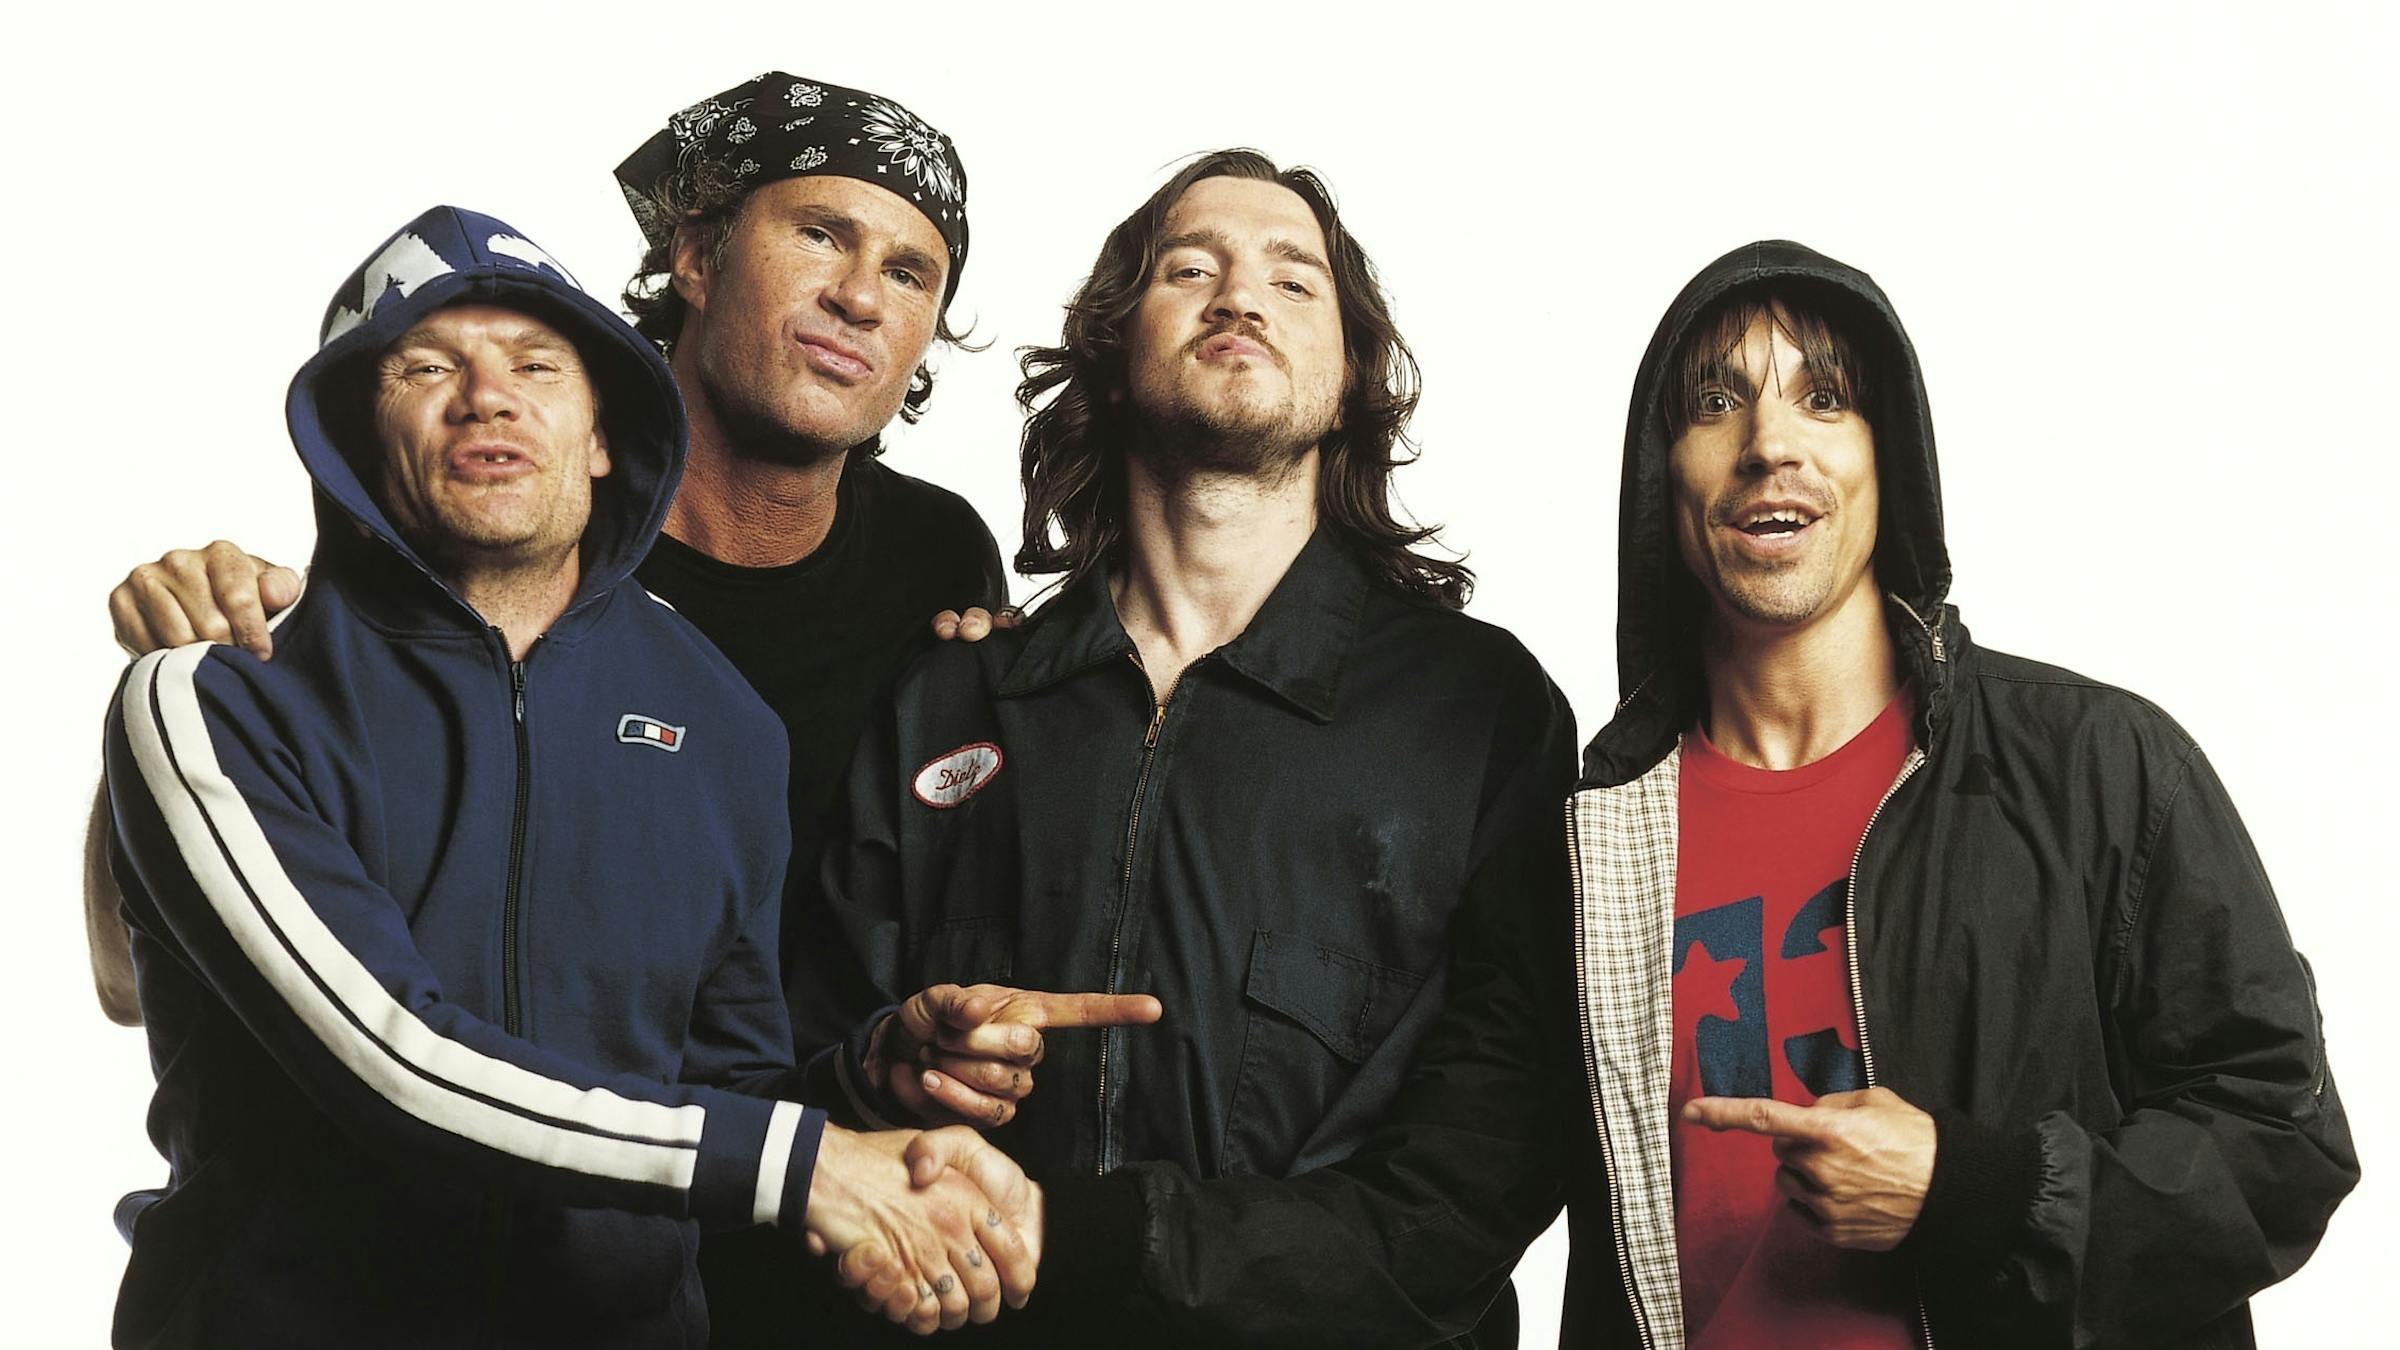 Watch The Red Hot Chili Peppers' First Performance With John Frusciante In 12 Years